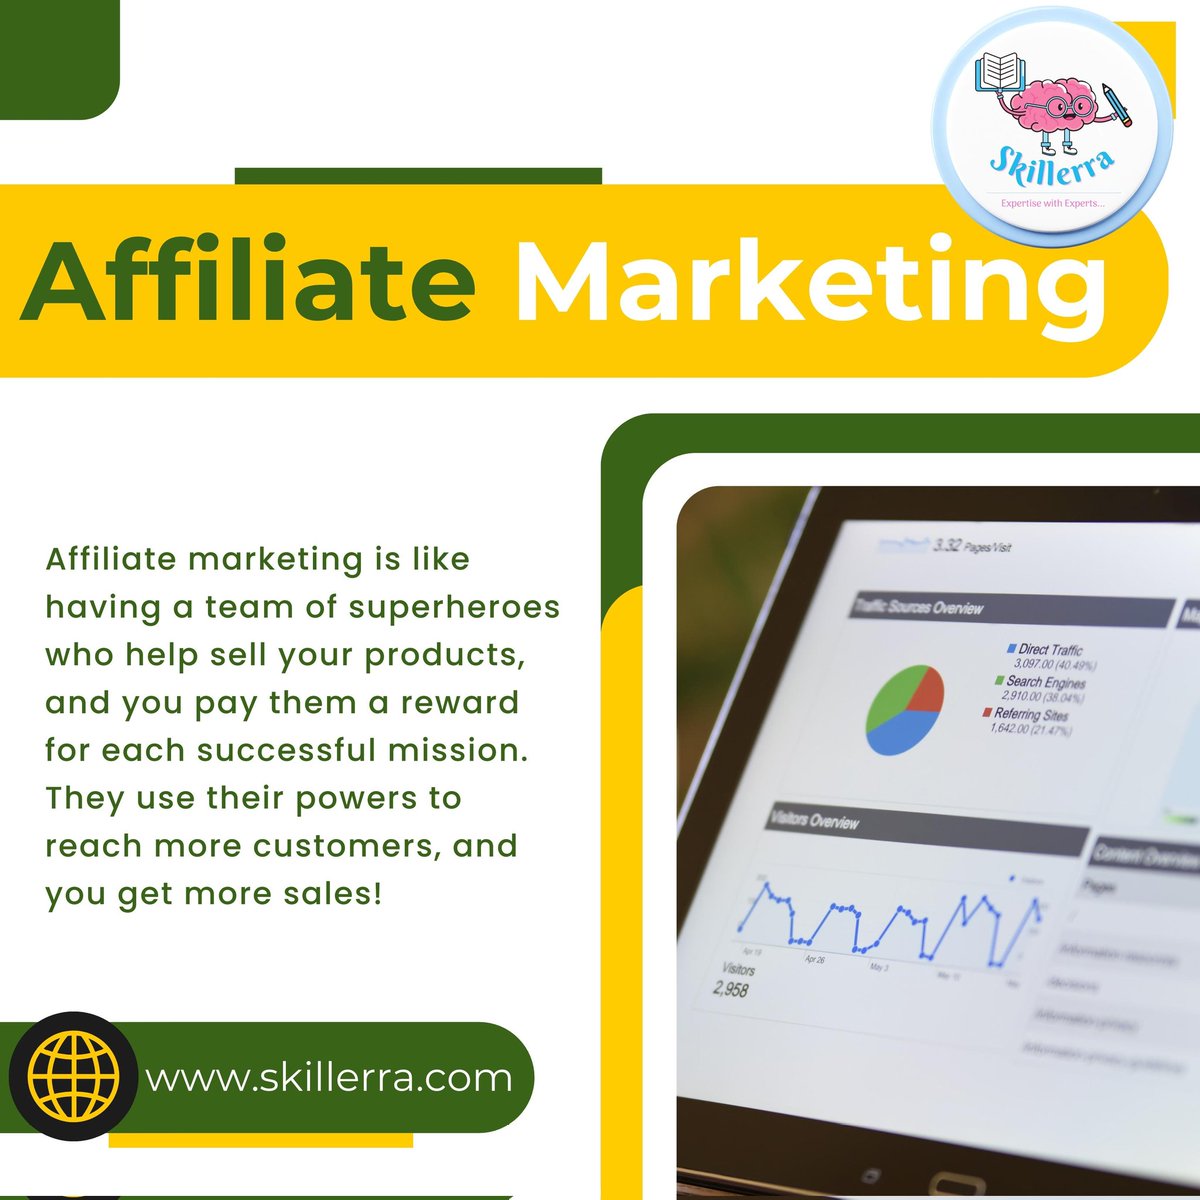 Join forces with affiliate marketing superheroes to boost your sales! 🚀💰 #AffiliateMarketing #SuperheroesOfSales #AffiliateMarketing #SuperheroesOfSales #BoostYourSales #MarketingStrategy #DigitalMarketing #OnlineSales #BusinessGrowth #CollaborationOverCompetition #SalesFunnel